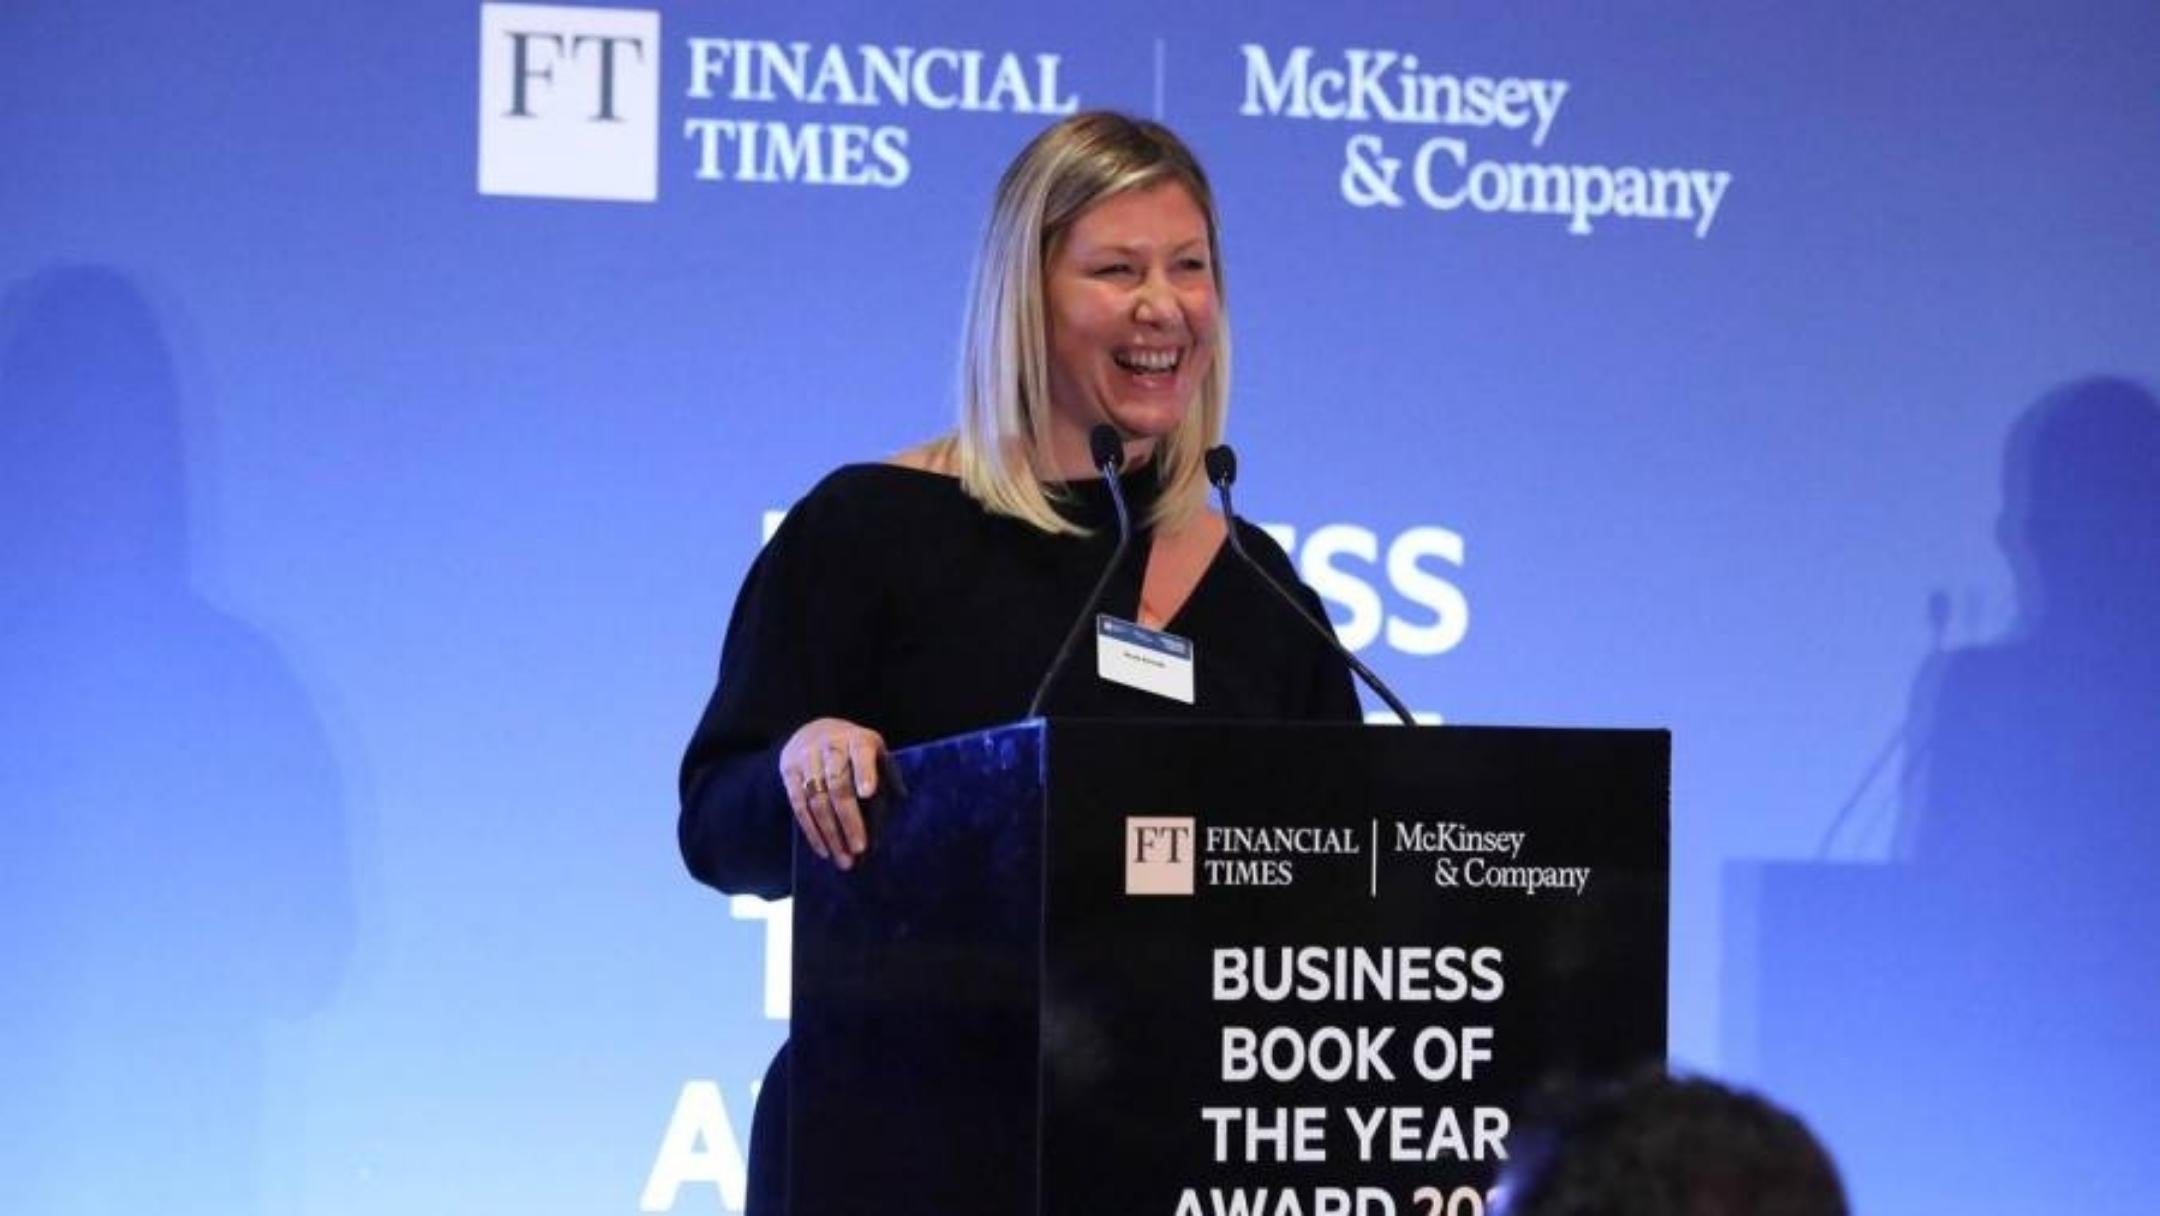 Financial Times 2021 Business Book of the Year